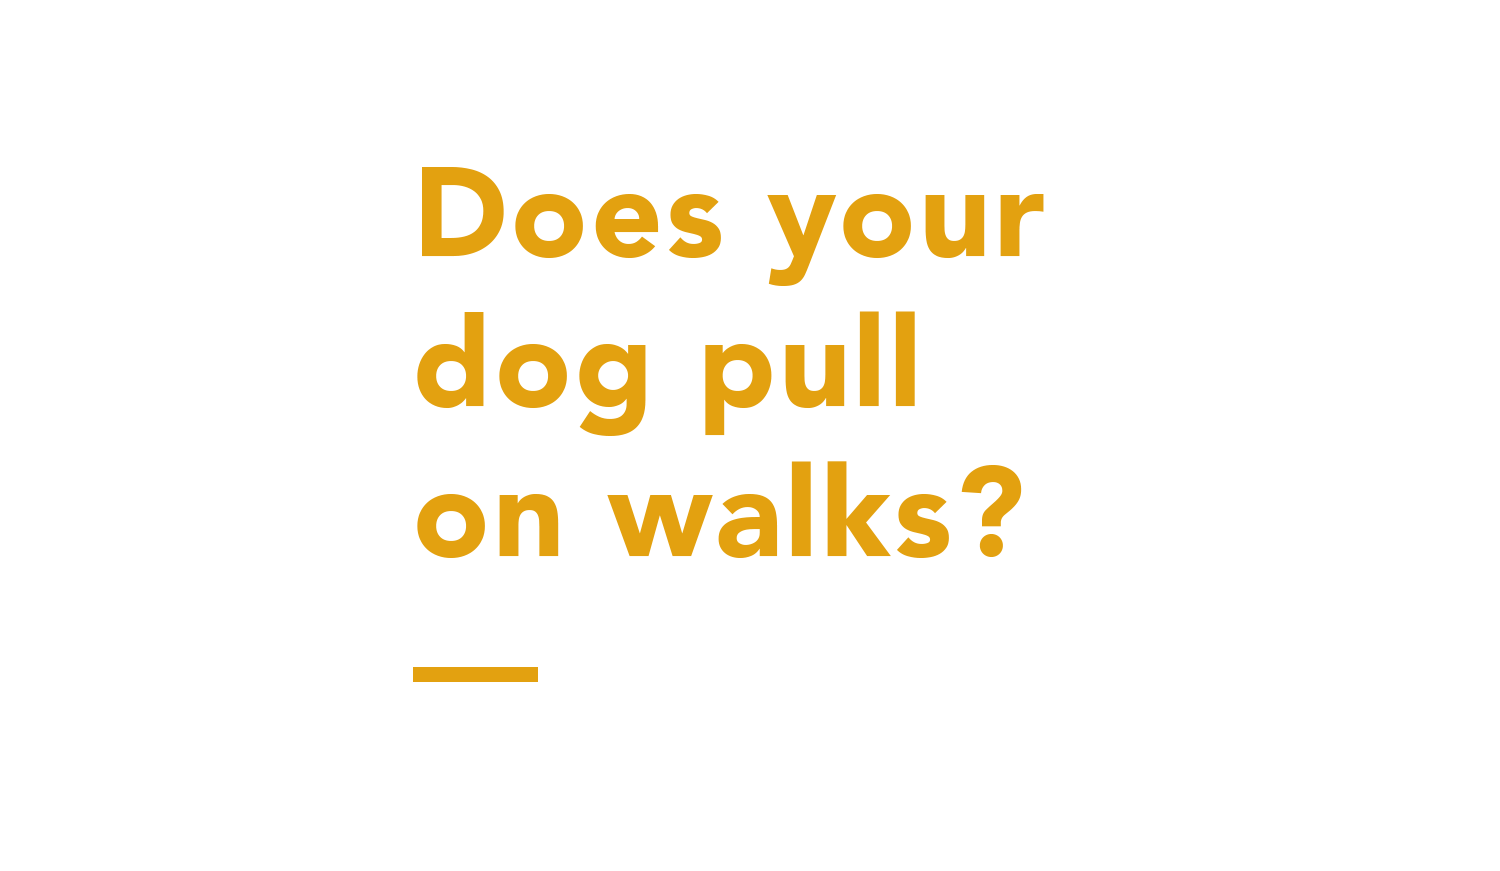 connection-dog-training-does-your-dog-pull-on-walks-text.png